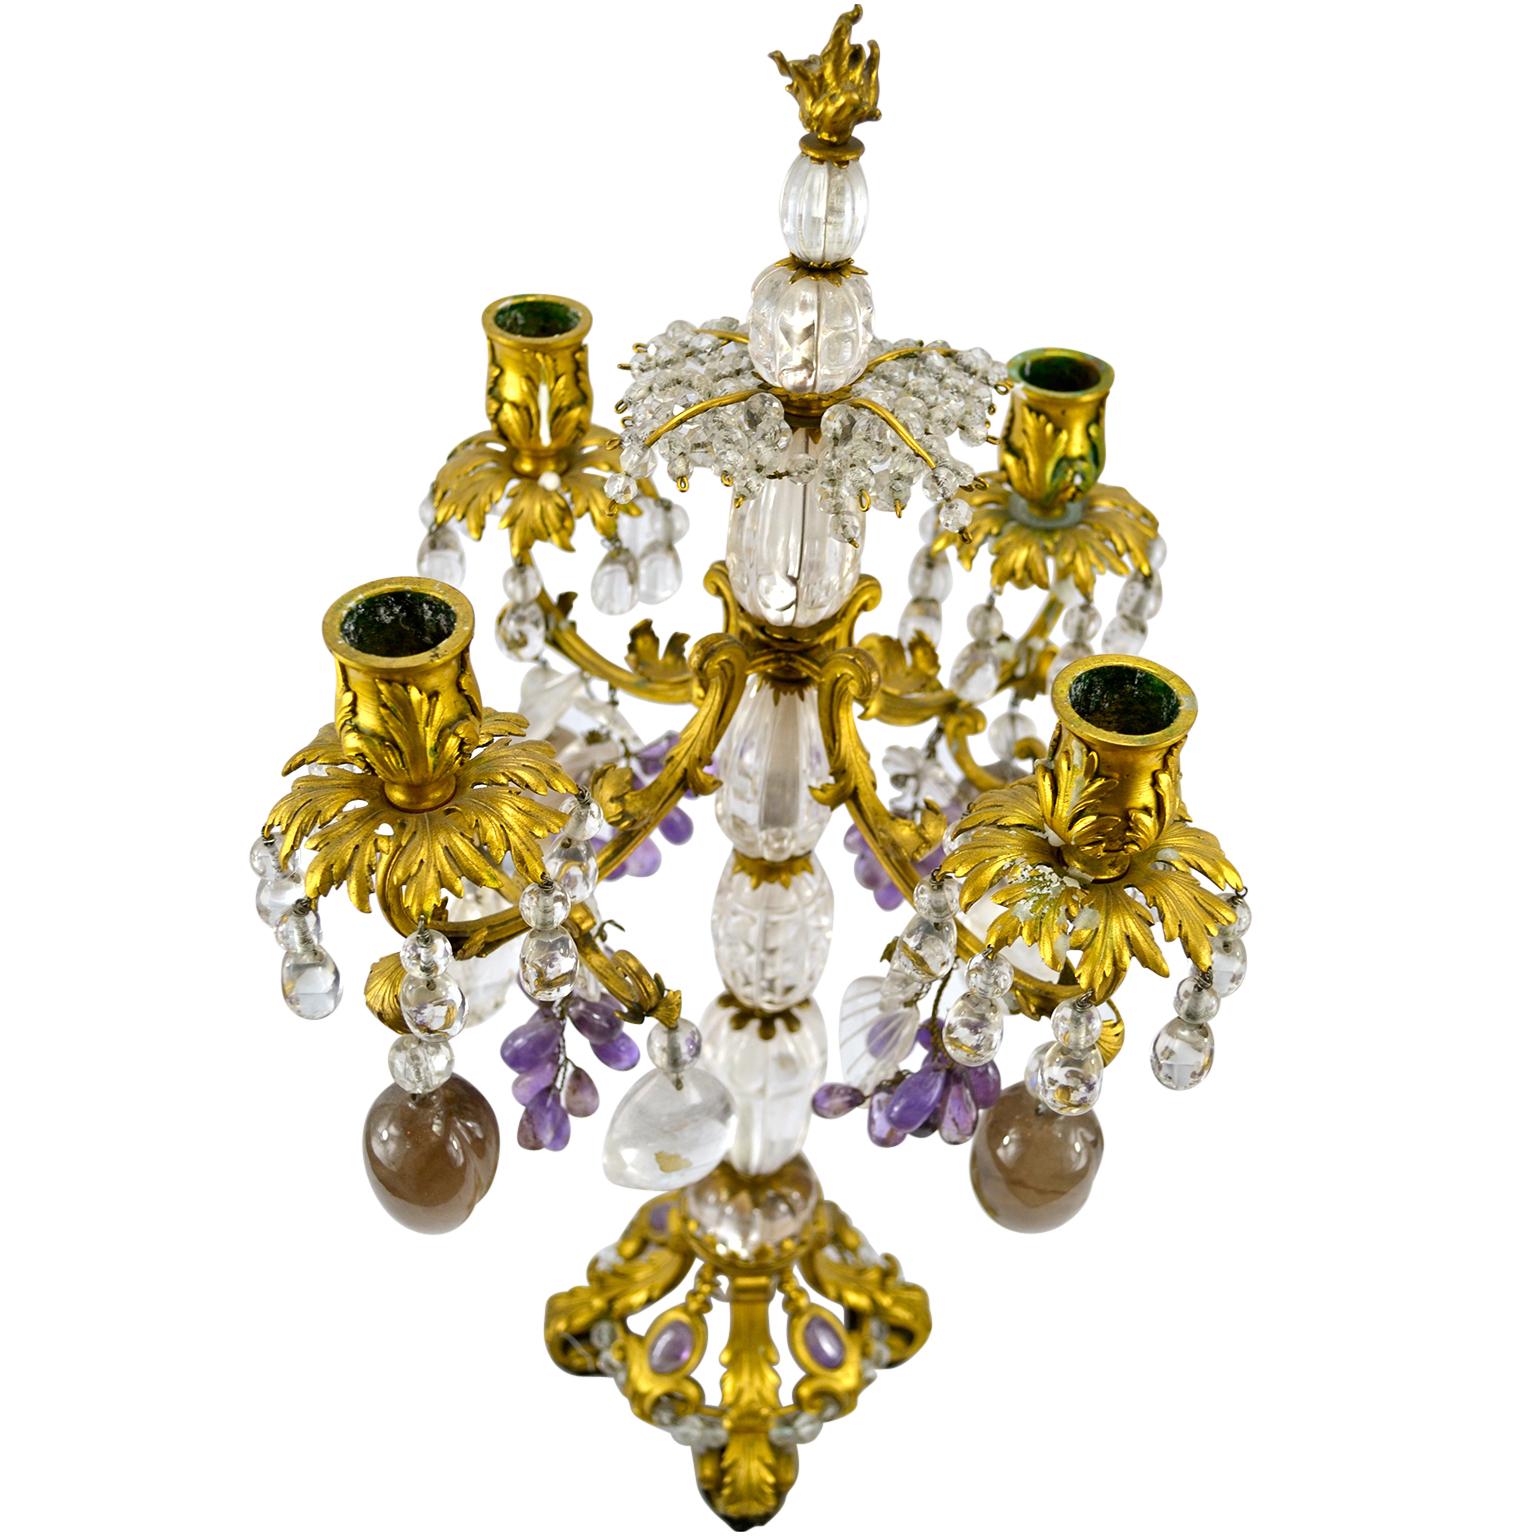 Hand-Crafted Pair of Louis XV Style Gilt Bronze Rock Crystal and Amethyst Candelabra